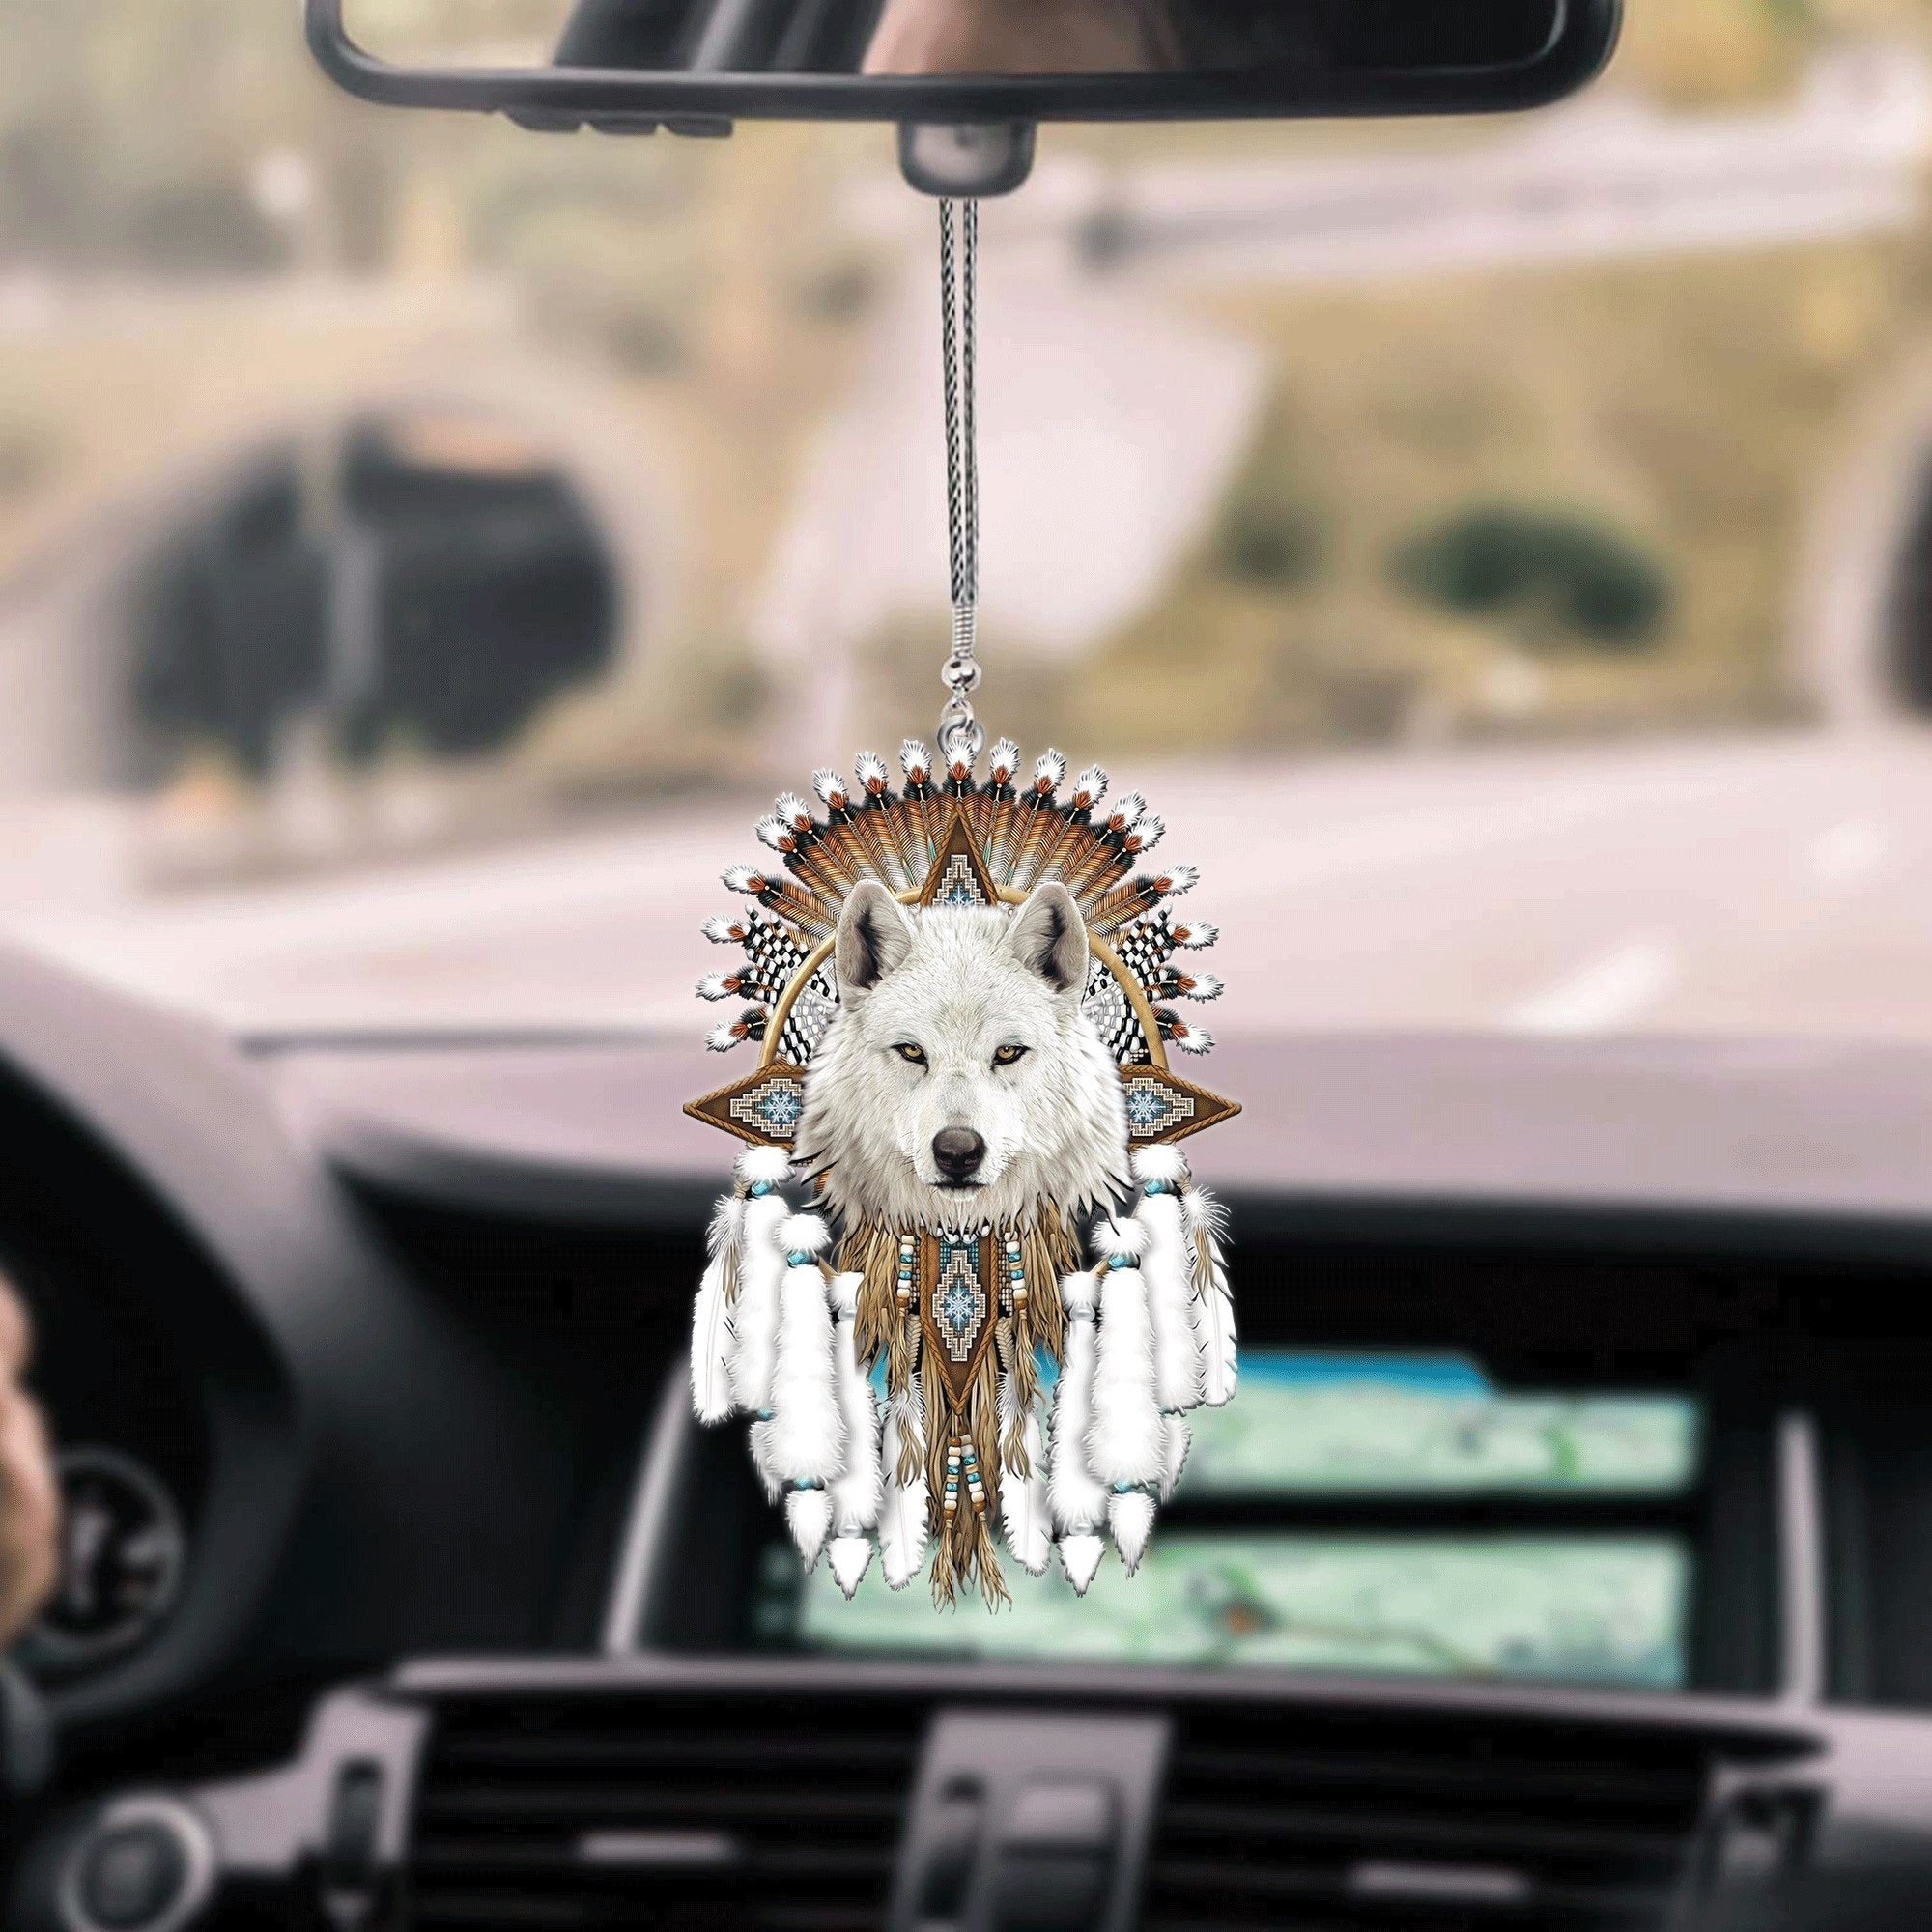 Cute Native American Car Hanging Ornament/ Native American Hanging Mirror Decoration For Car